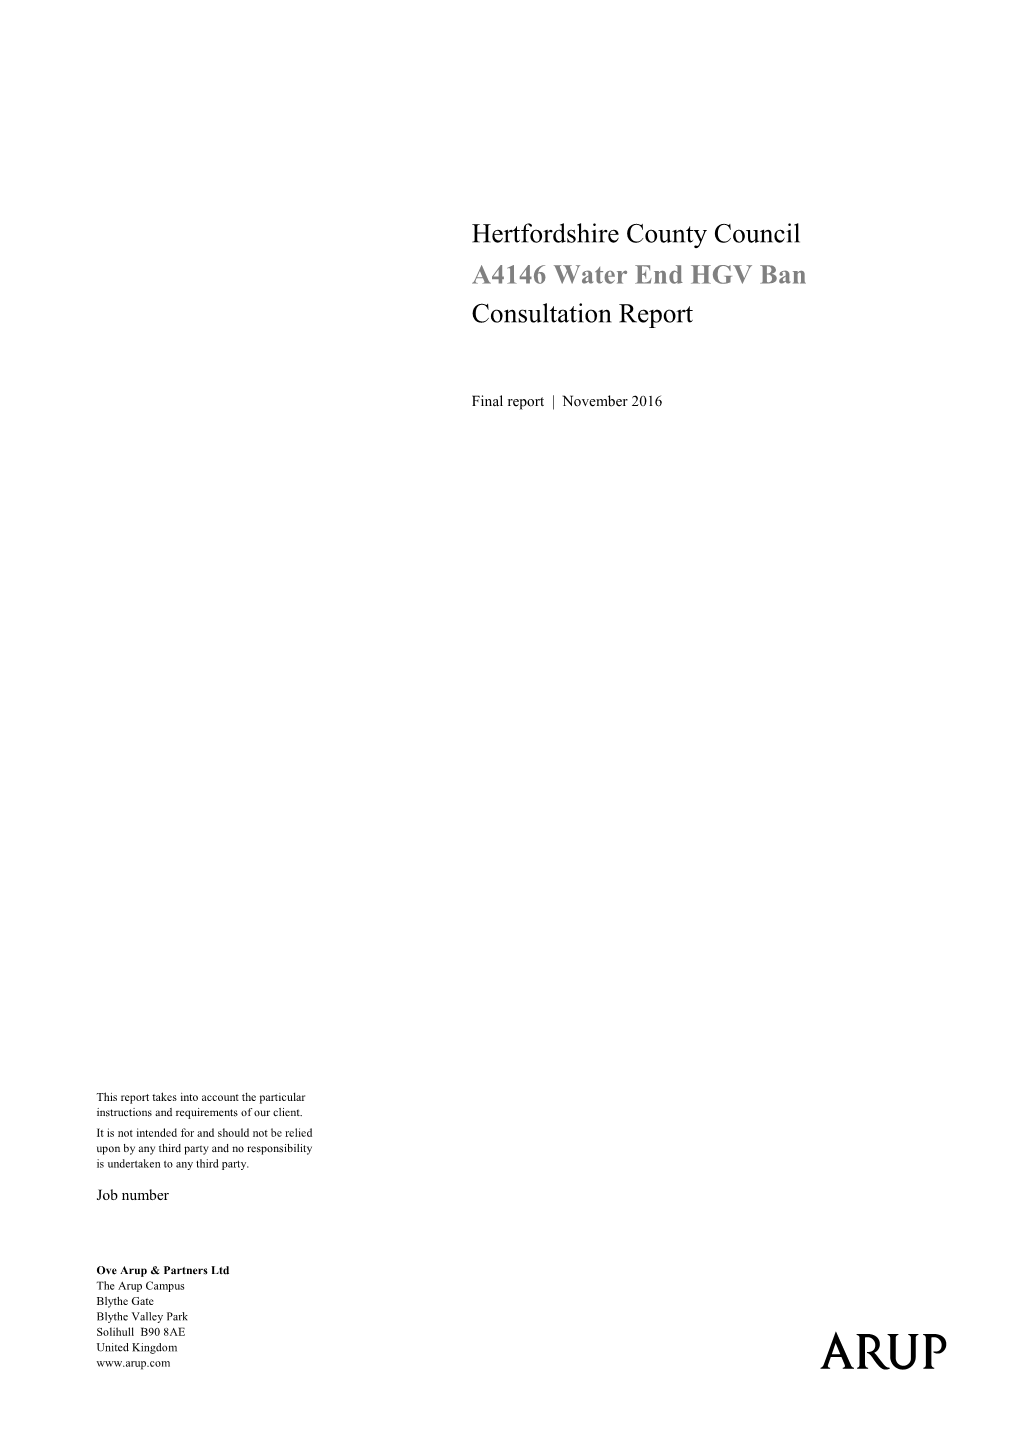 Hertfordshire County Council A4146 Water End HGV Ban Consultation Report